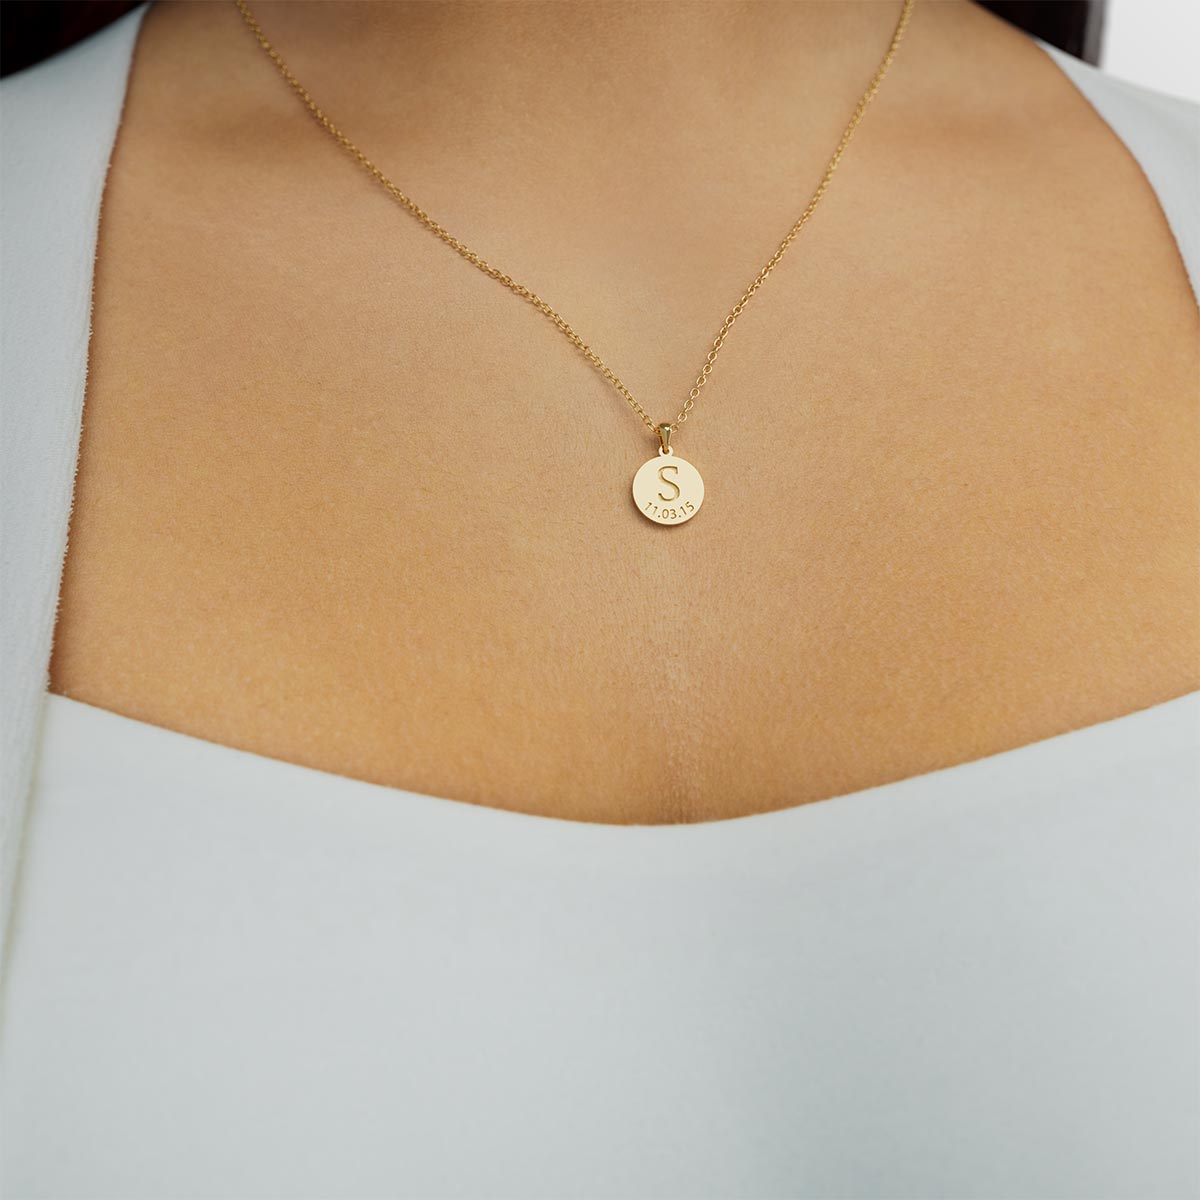 Personalized Initial Disc Necklace with Date Engraving